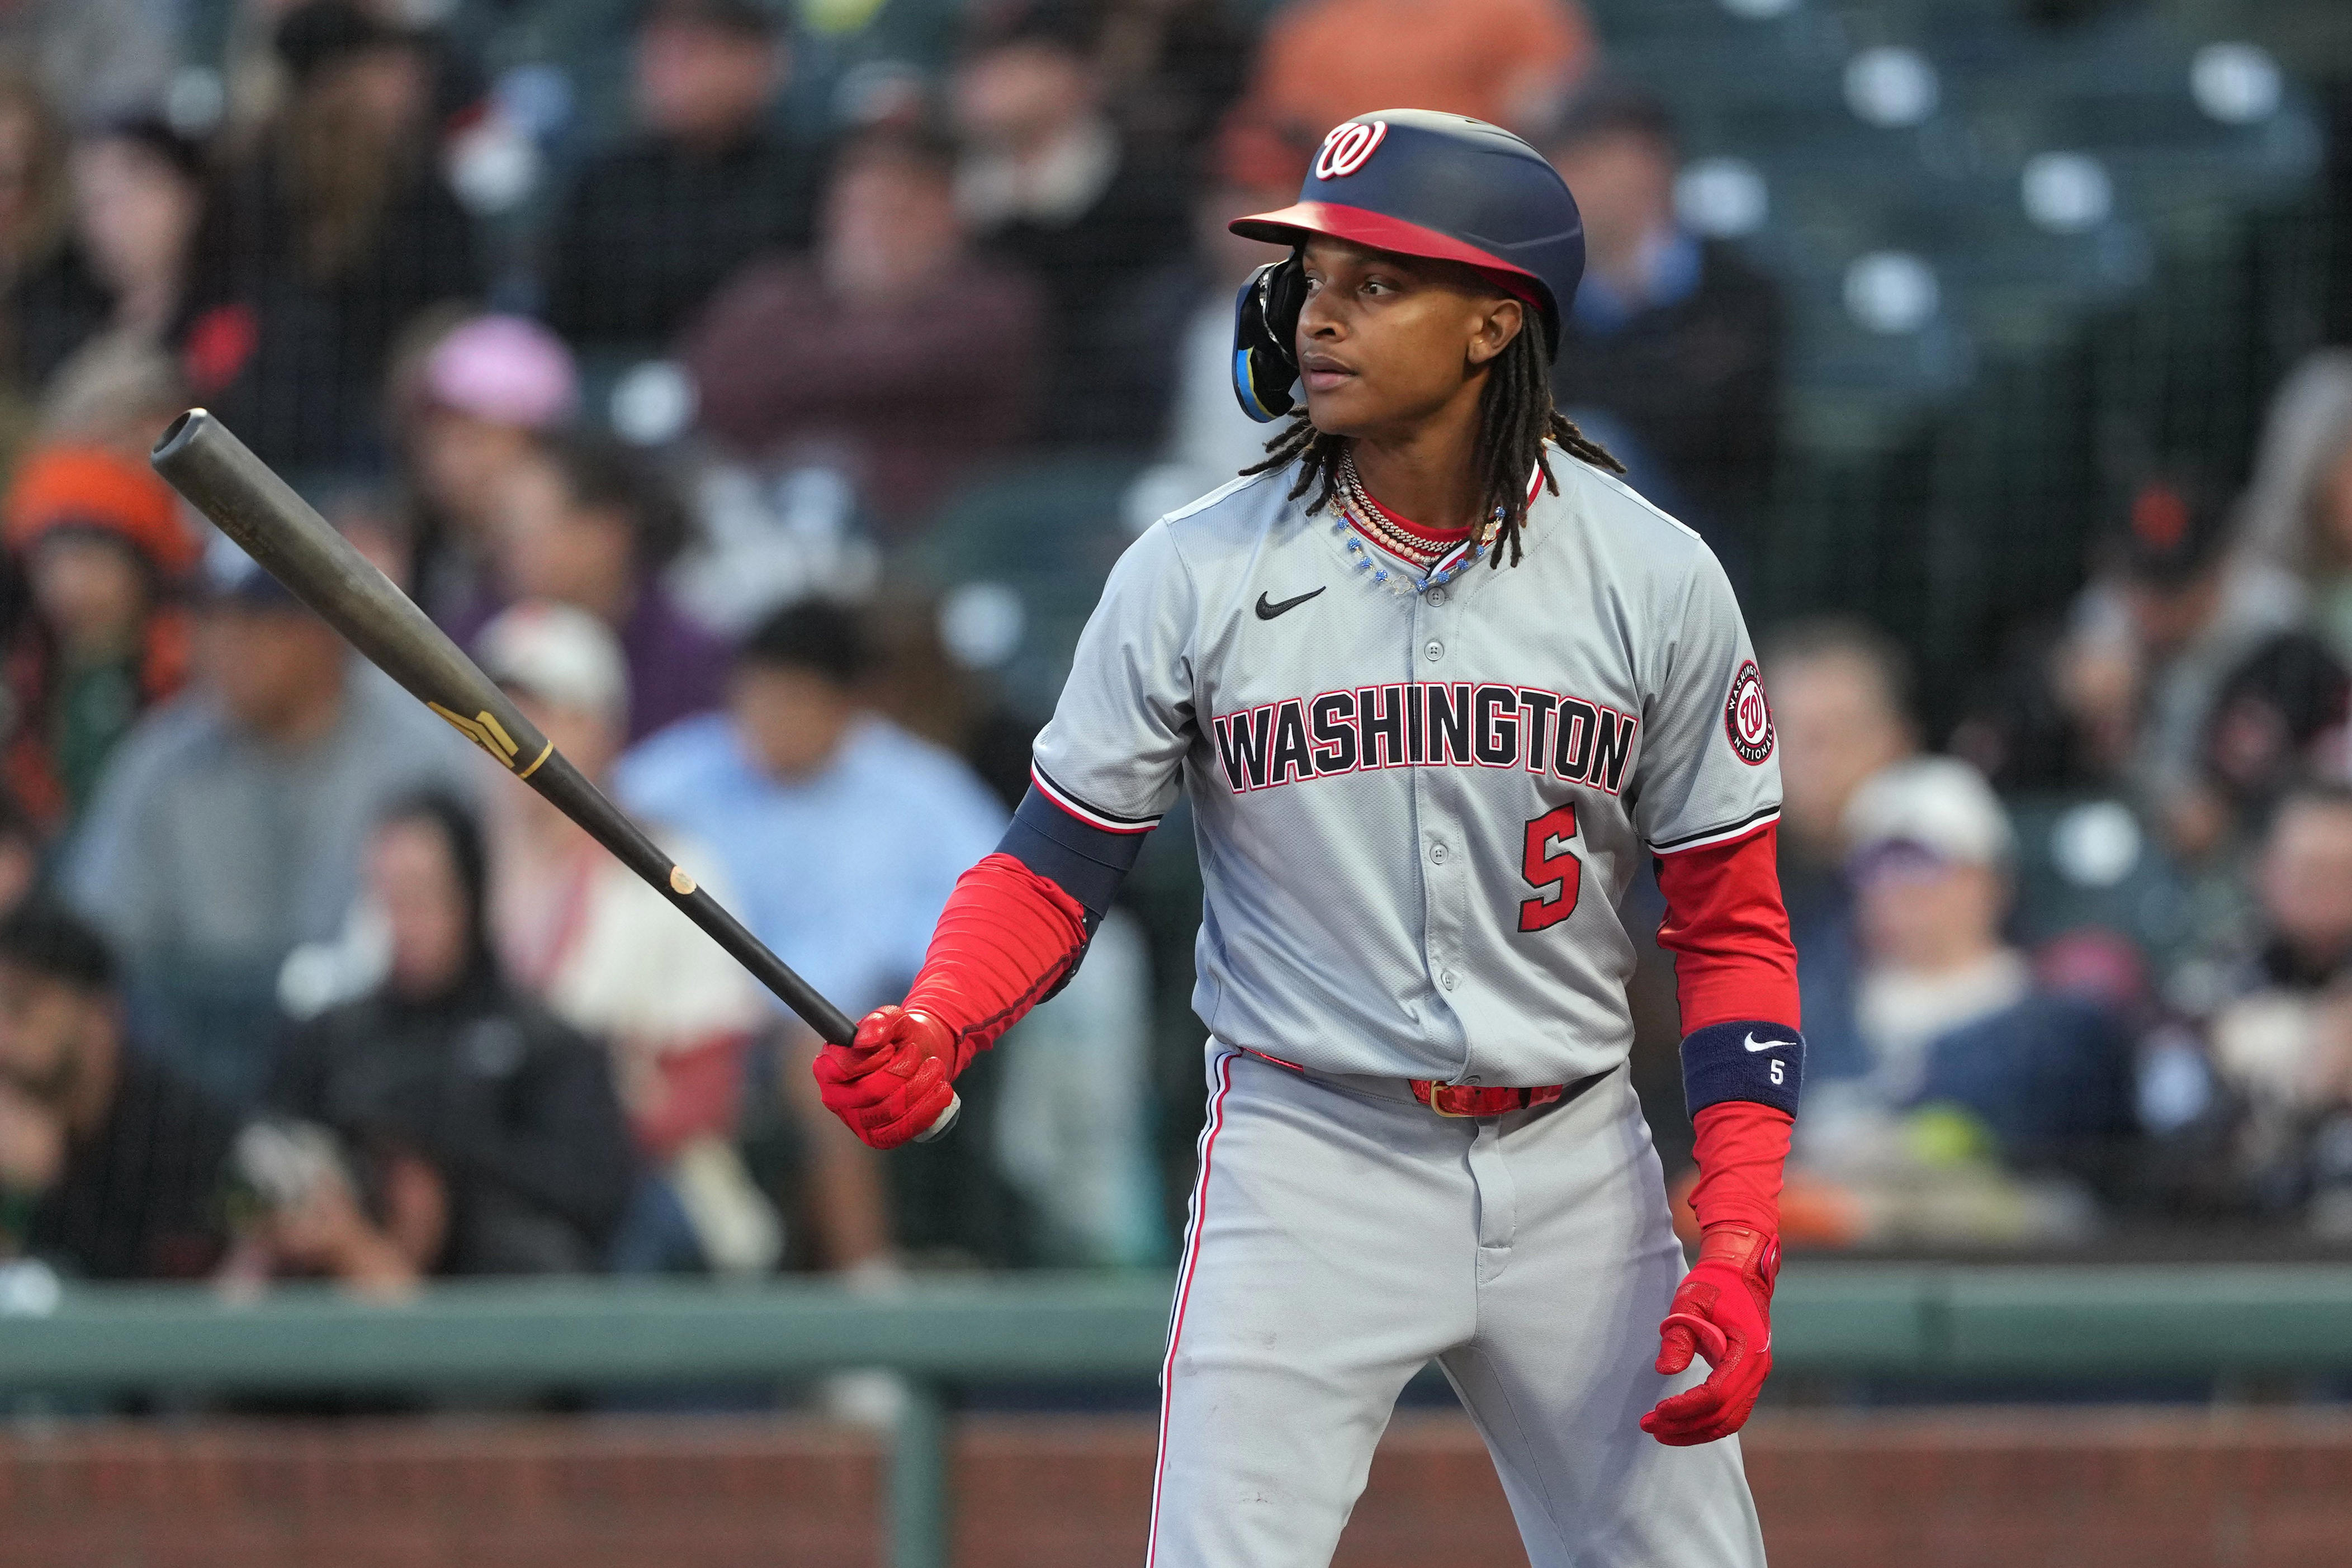 shortstop cj abrams growing into star for nationals: 'we’re going to go as far as he goes'